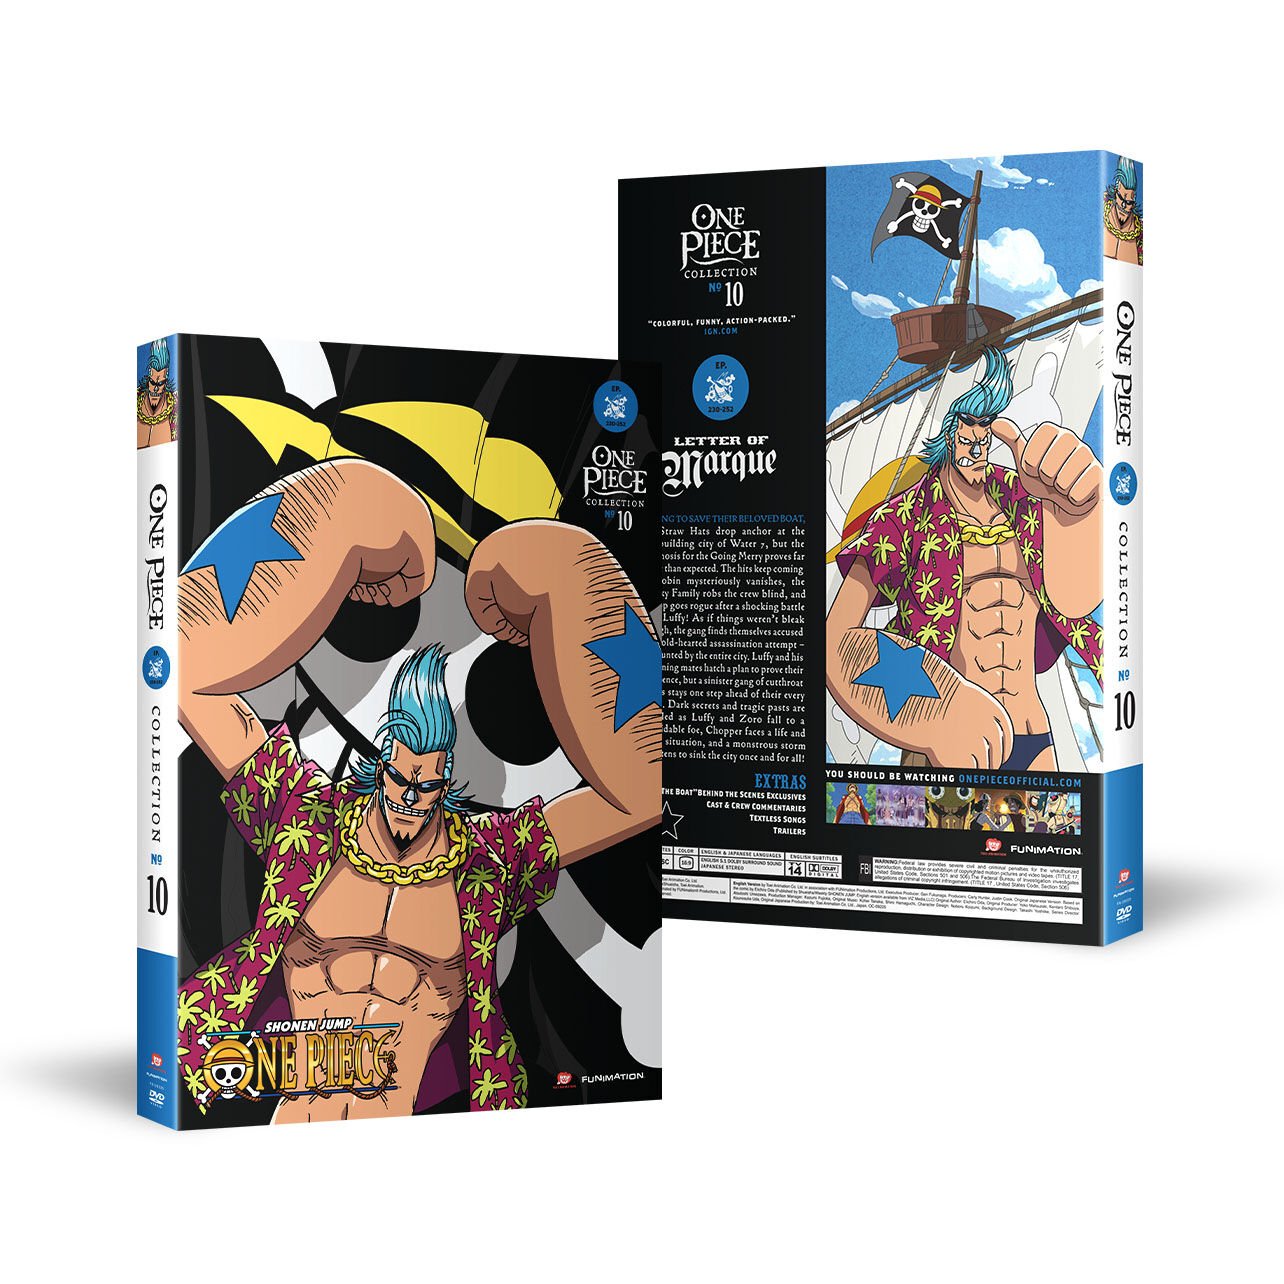 One Piece - Collection 10 - DVD | Crunchyroll Store